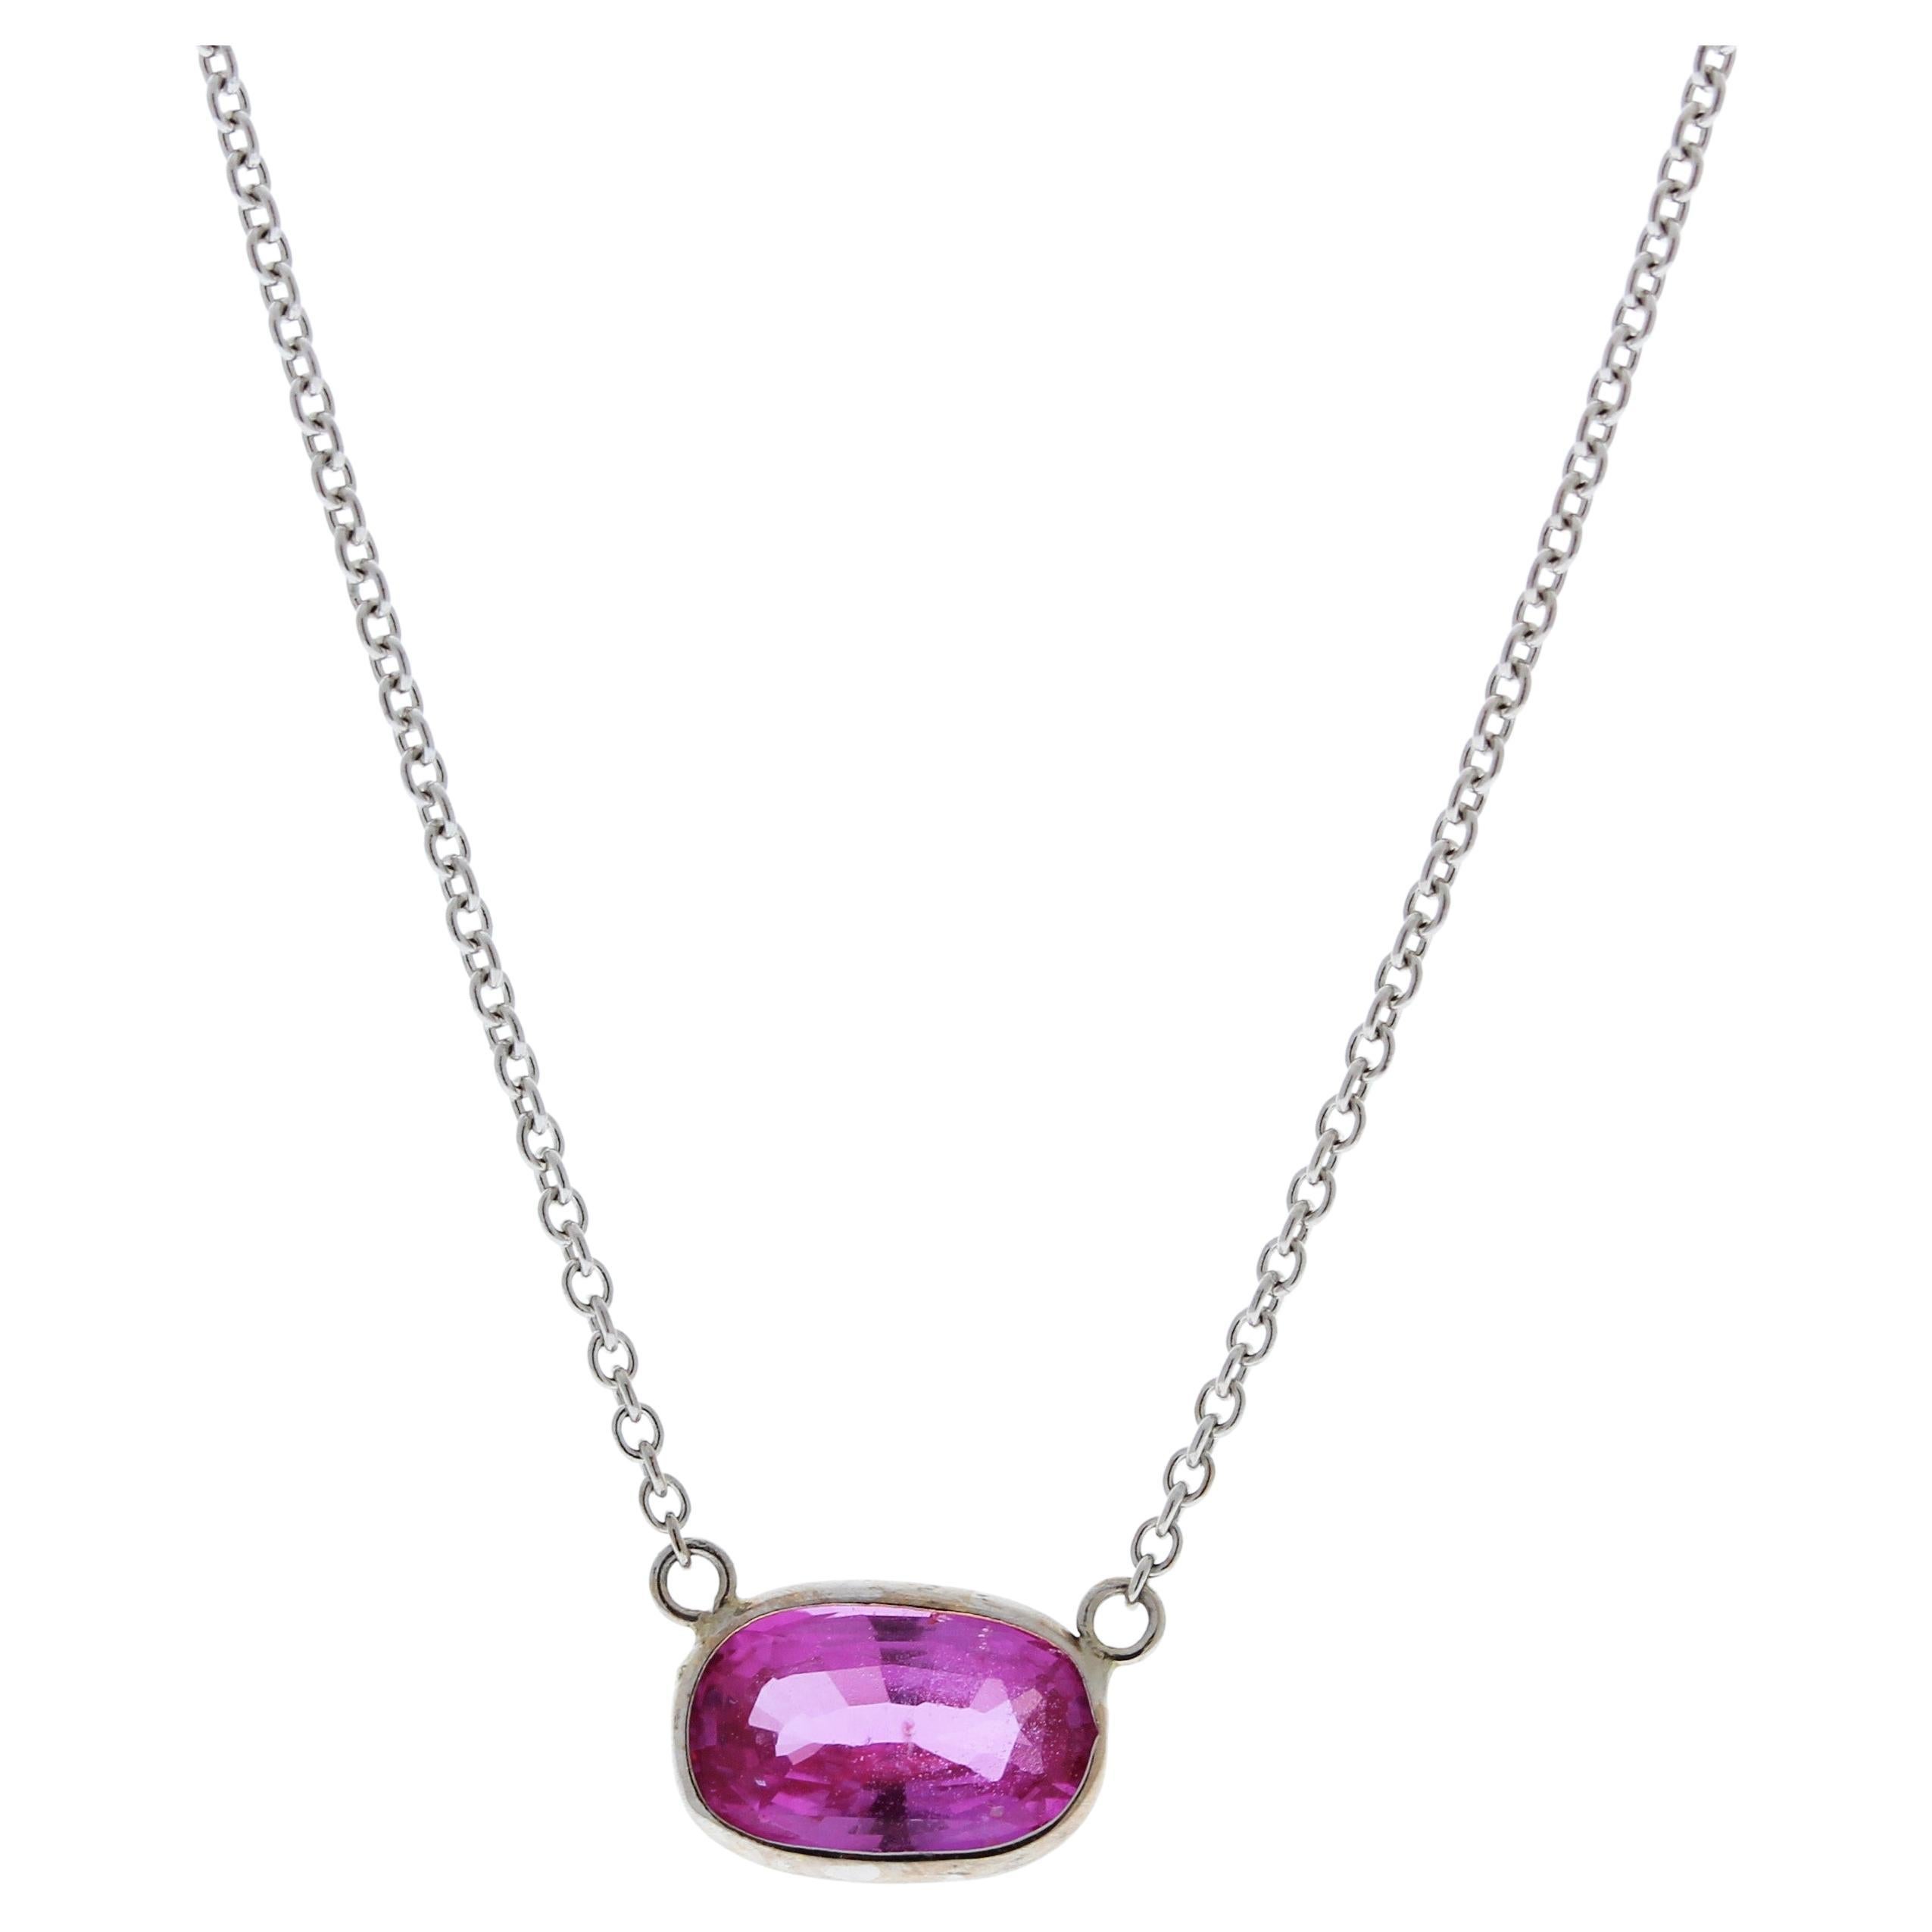 2.15 Carat Cushion Sapphire Pink Fashion Necklaces In 14k White Gold For Sale